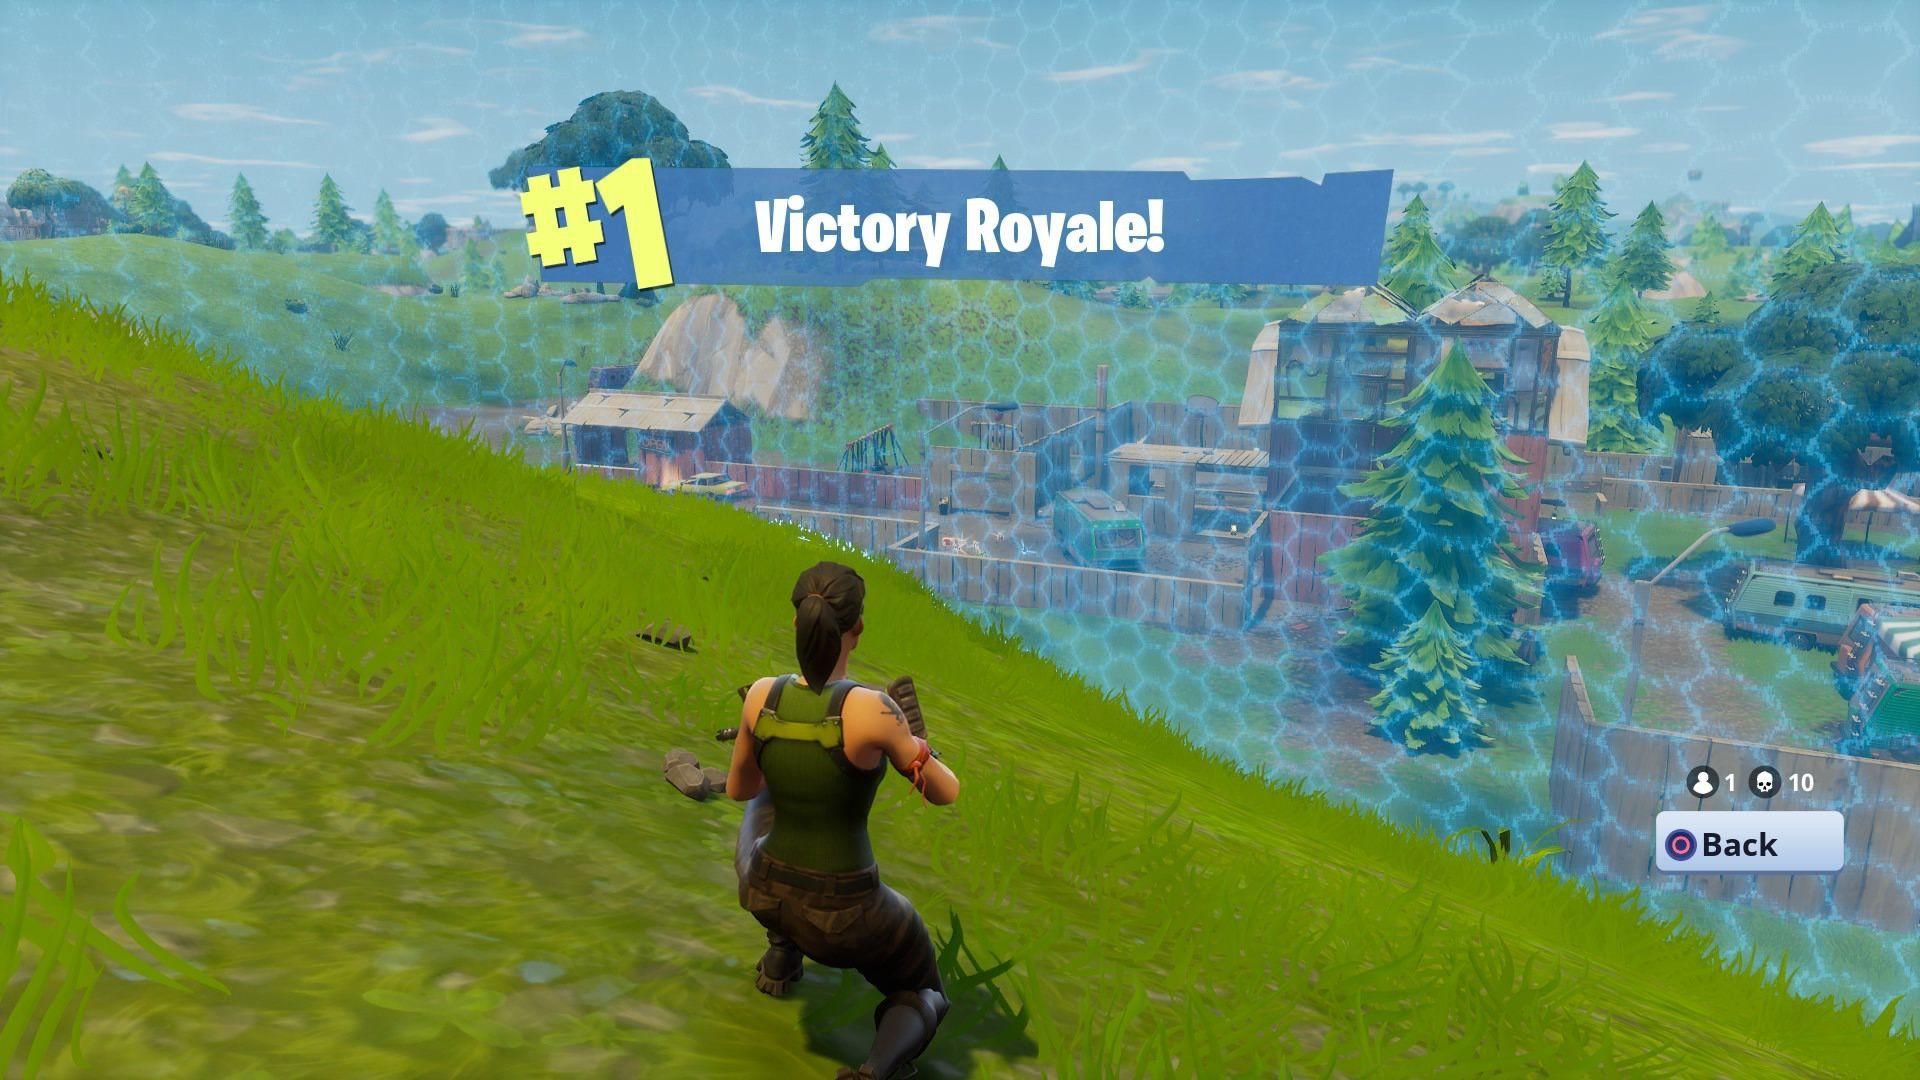 Victory Royale Fortnite Wallpapers Top Free Victory Royale Fortnite Backgrounds Wallpaperaccess